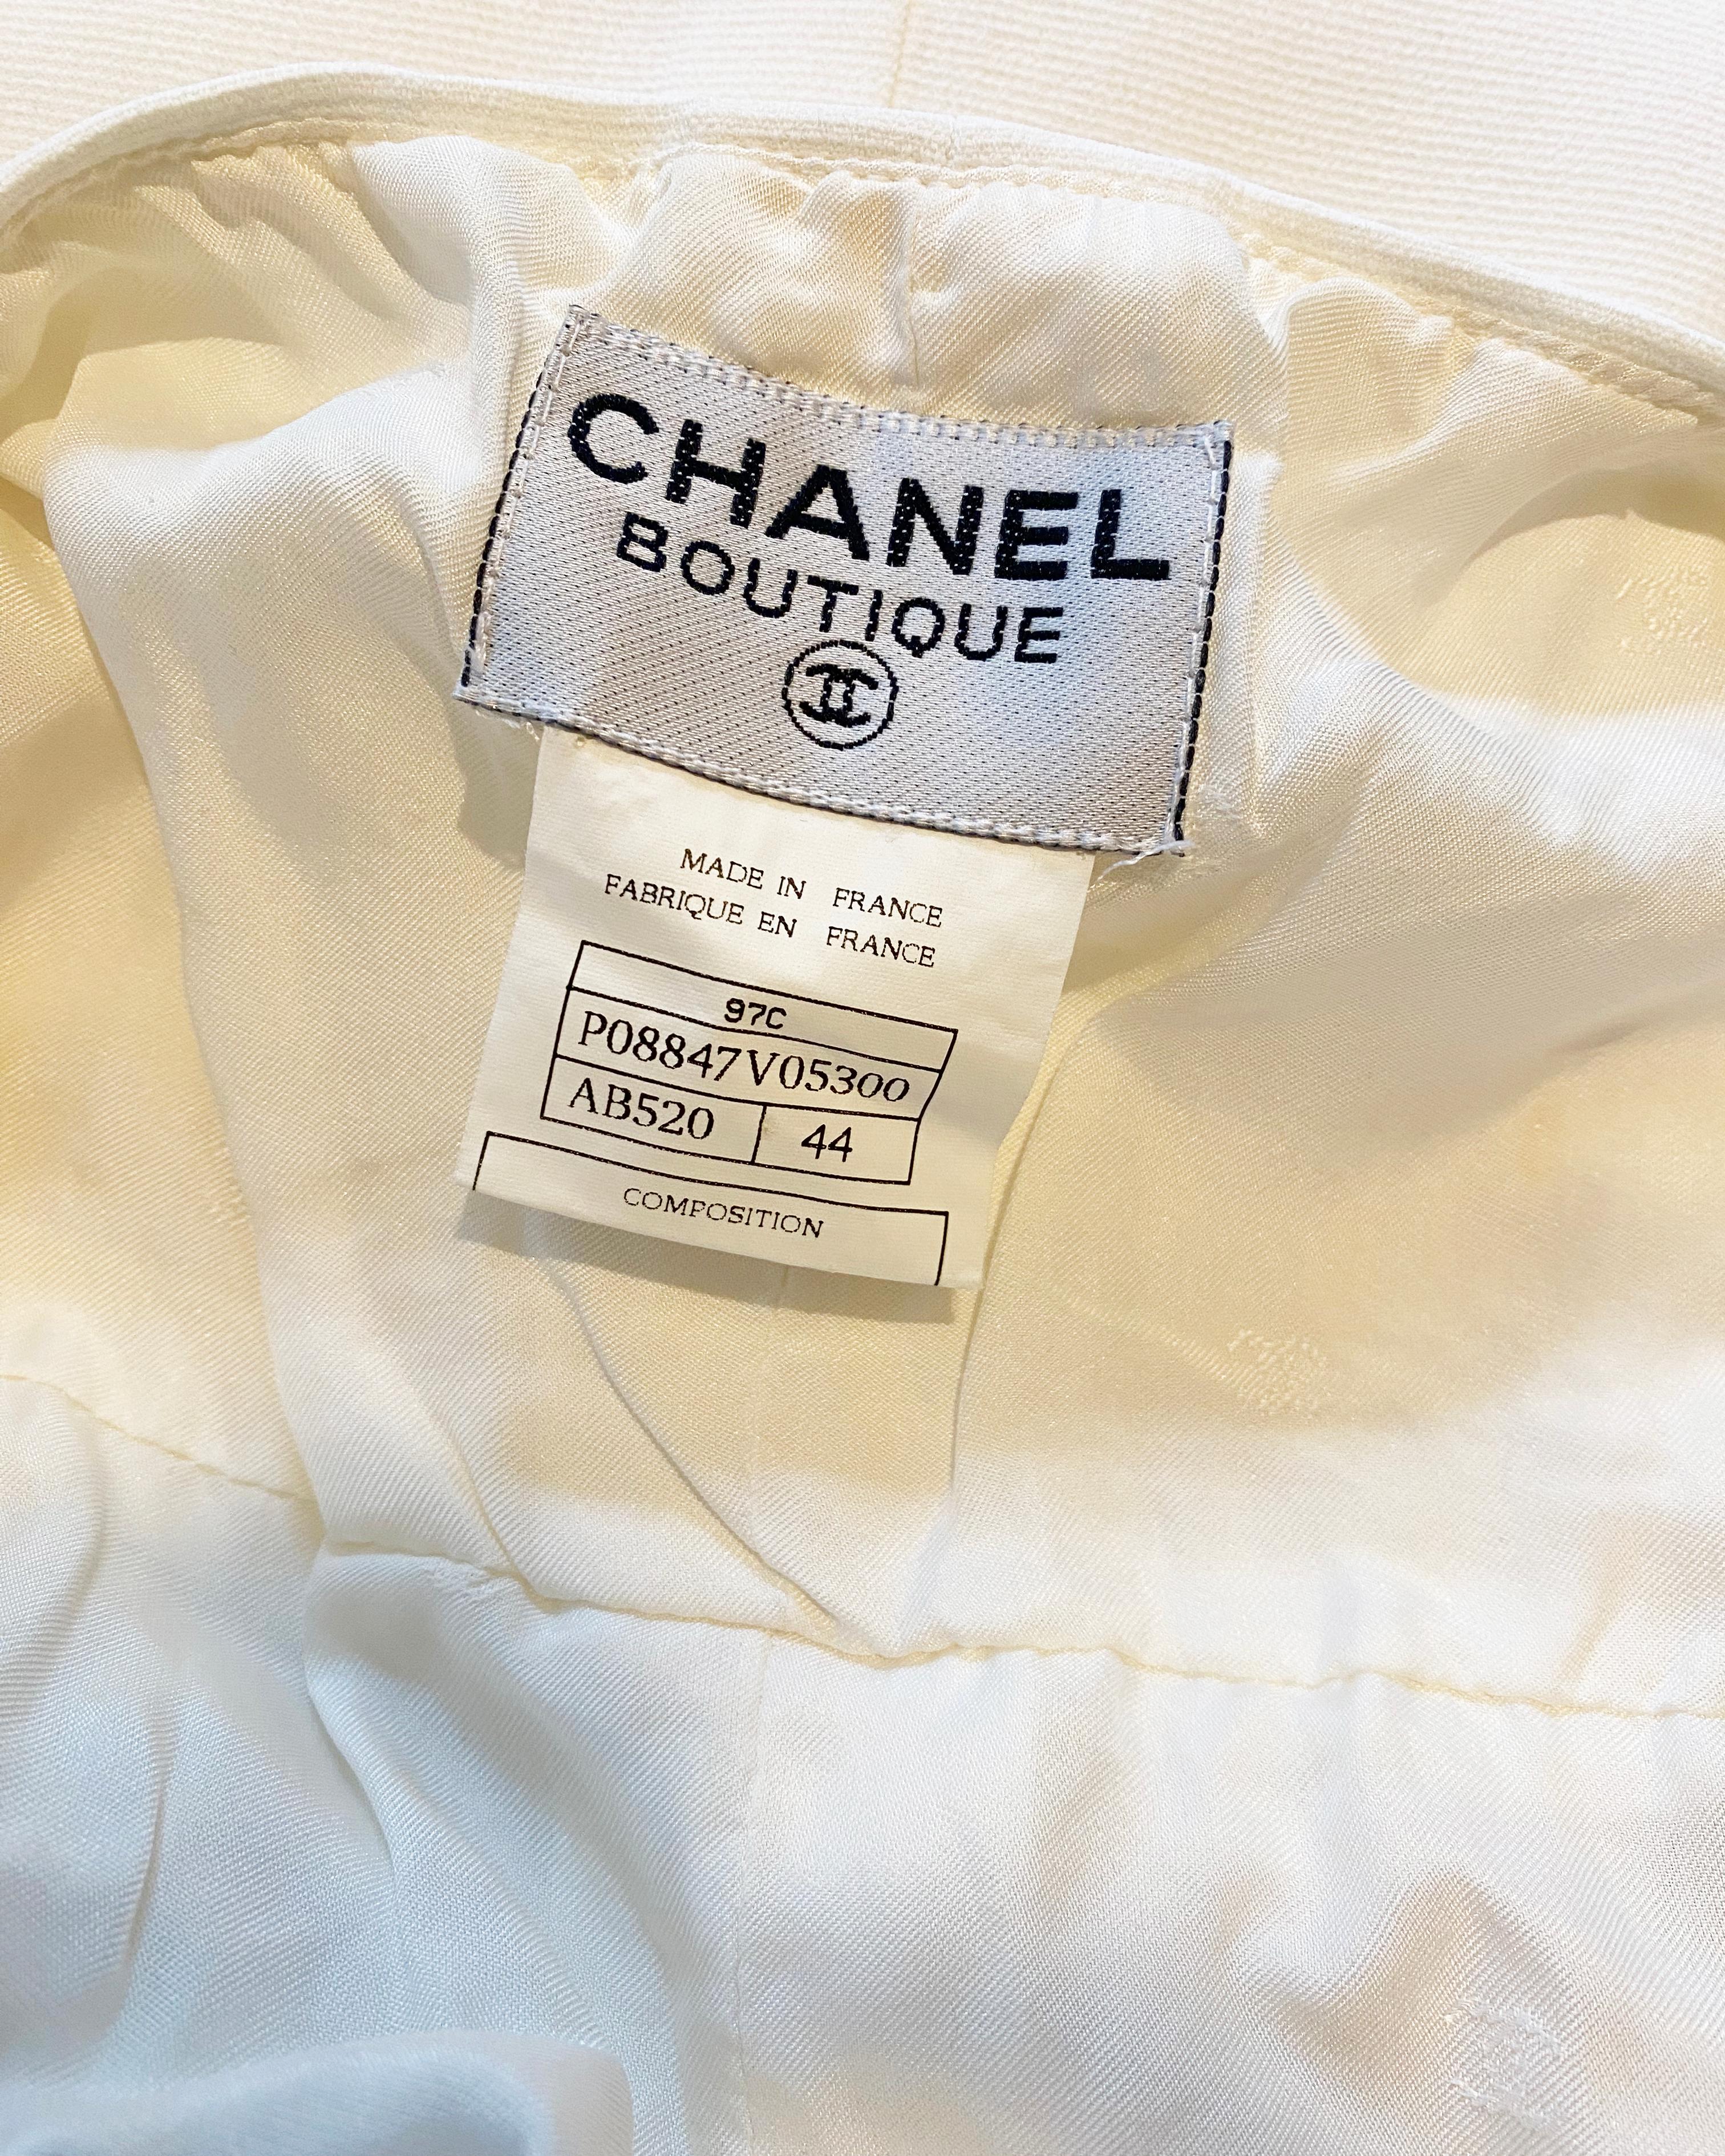 Chanel cruise 1997 vintage white wedding midi dress with logo button up front   For Sale 11